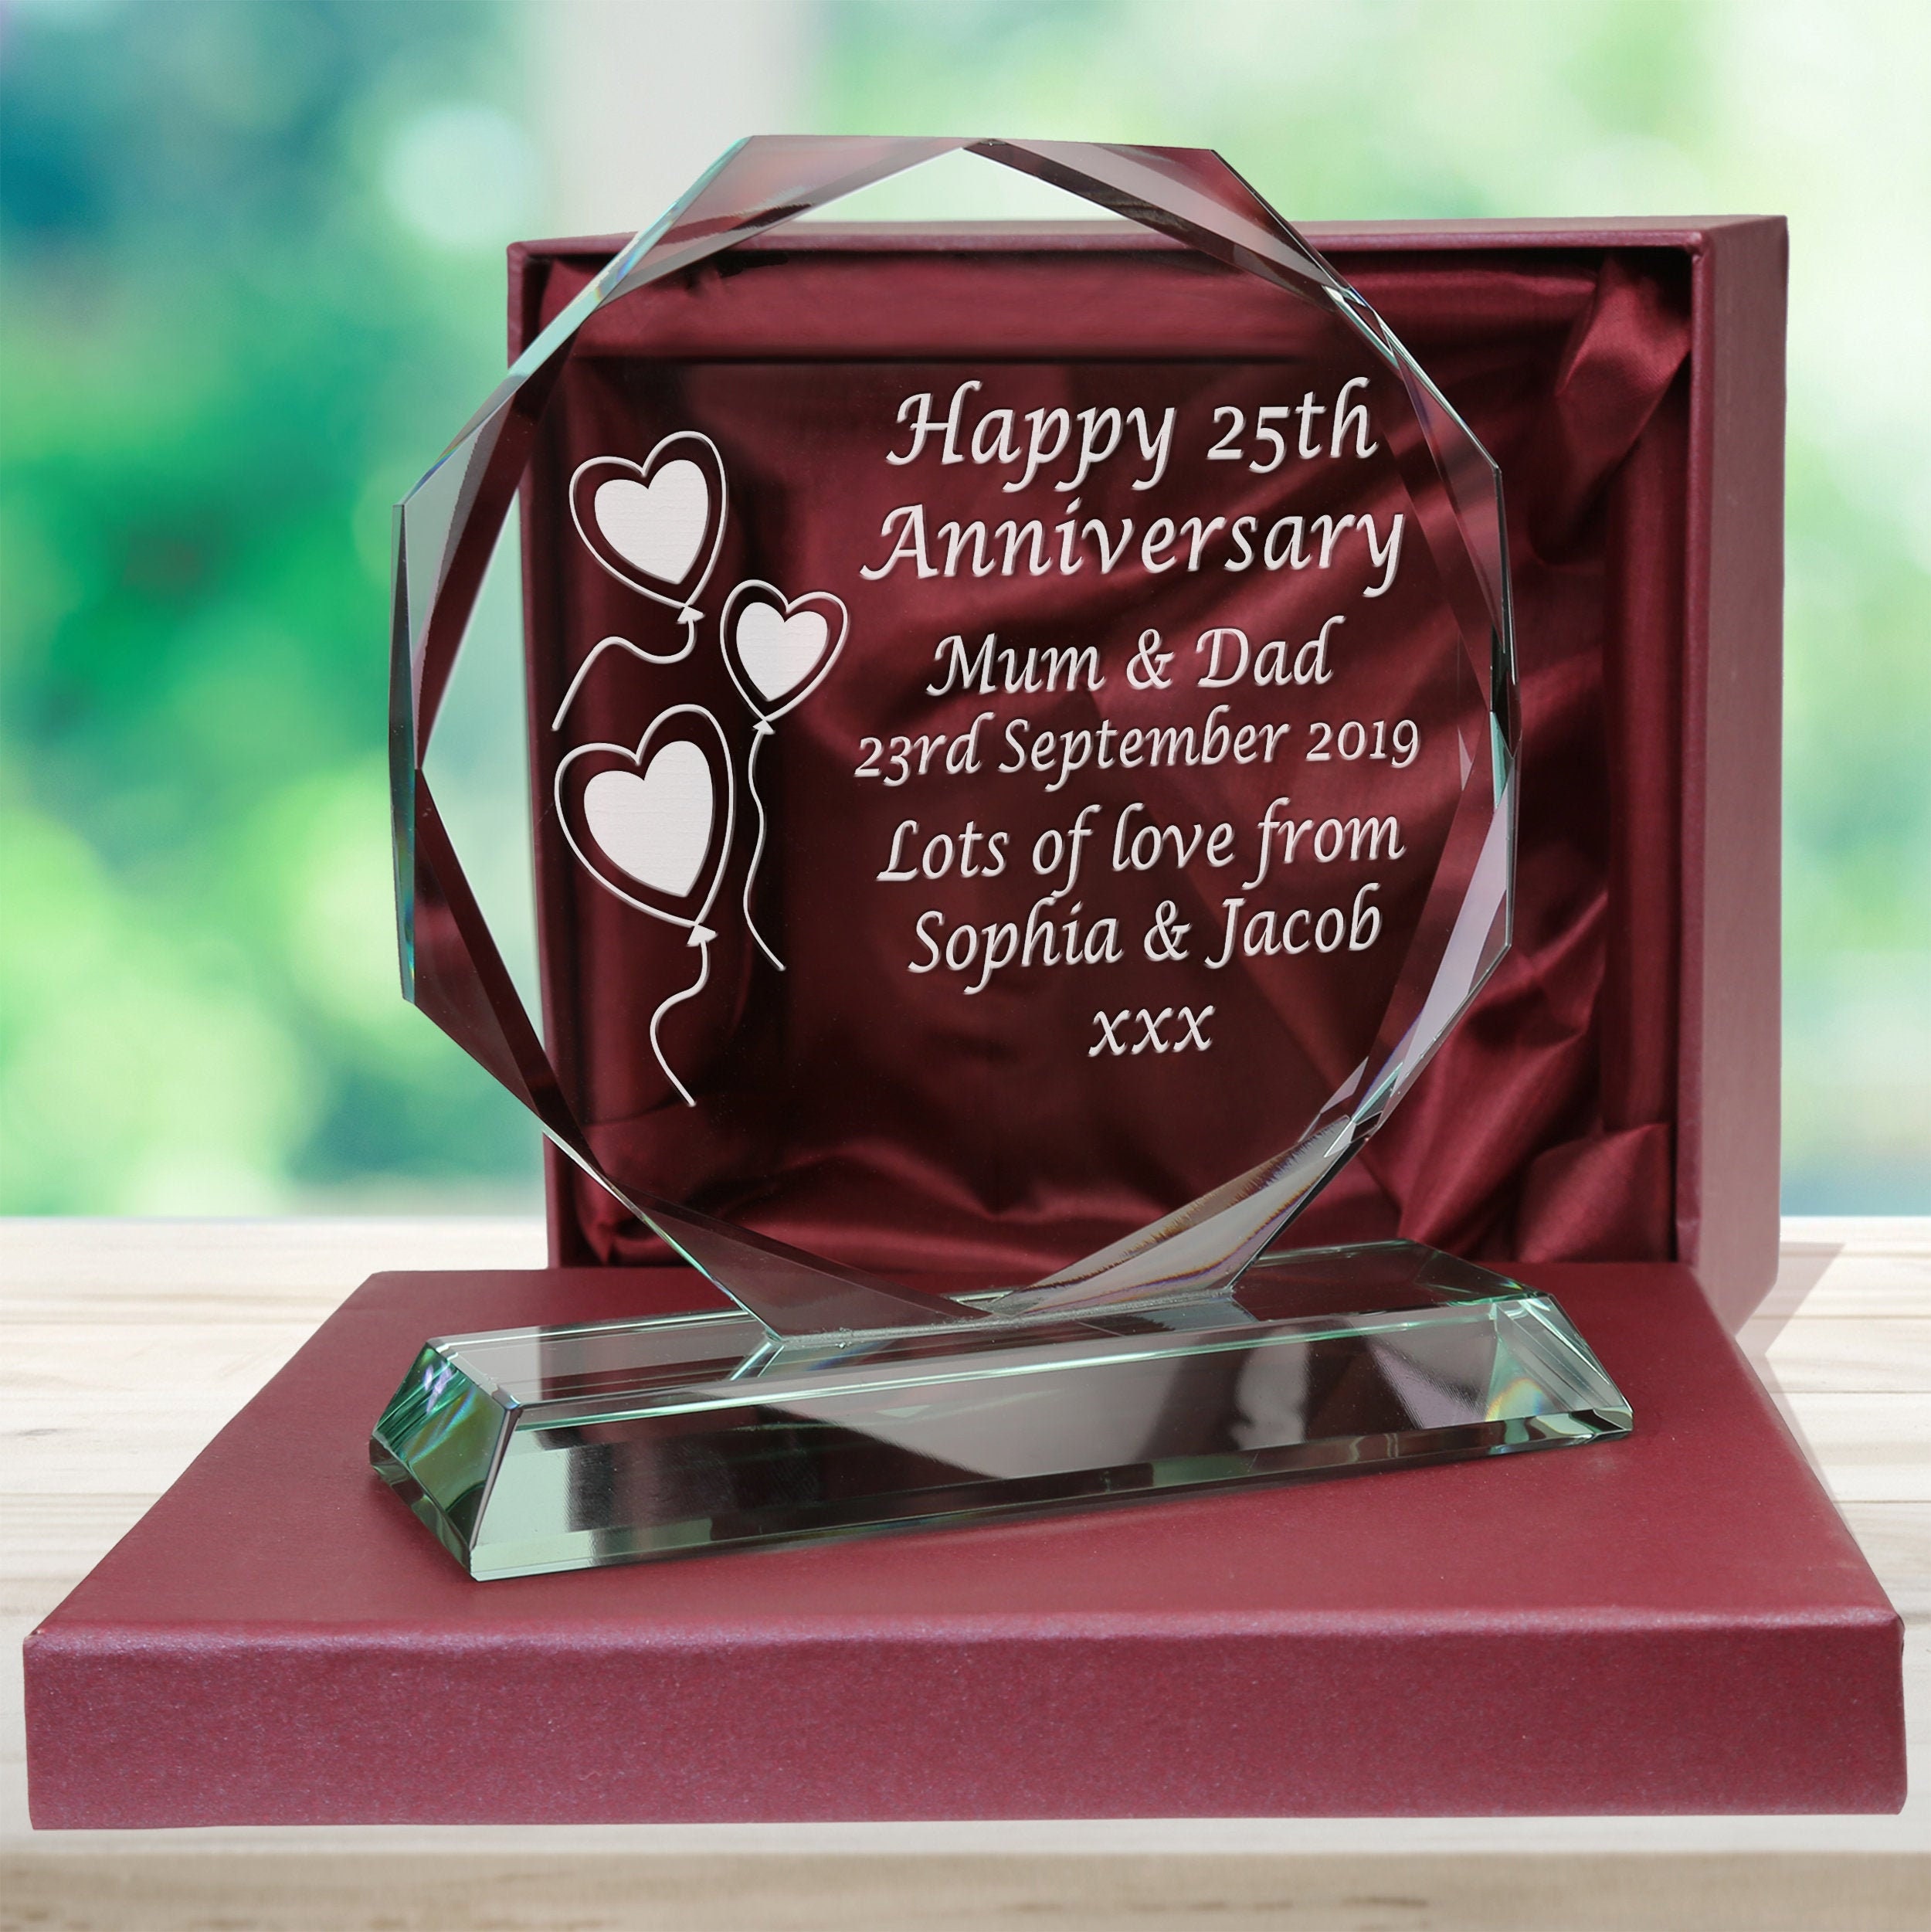 25th Wedding Anniversary Lantern, Best 25th Anniversary Wedding Gifts for  Couple Parents Wife Husband Silver 25 Years of Marriage for Him Her, Unique